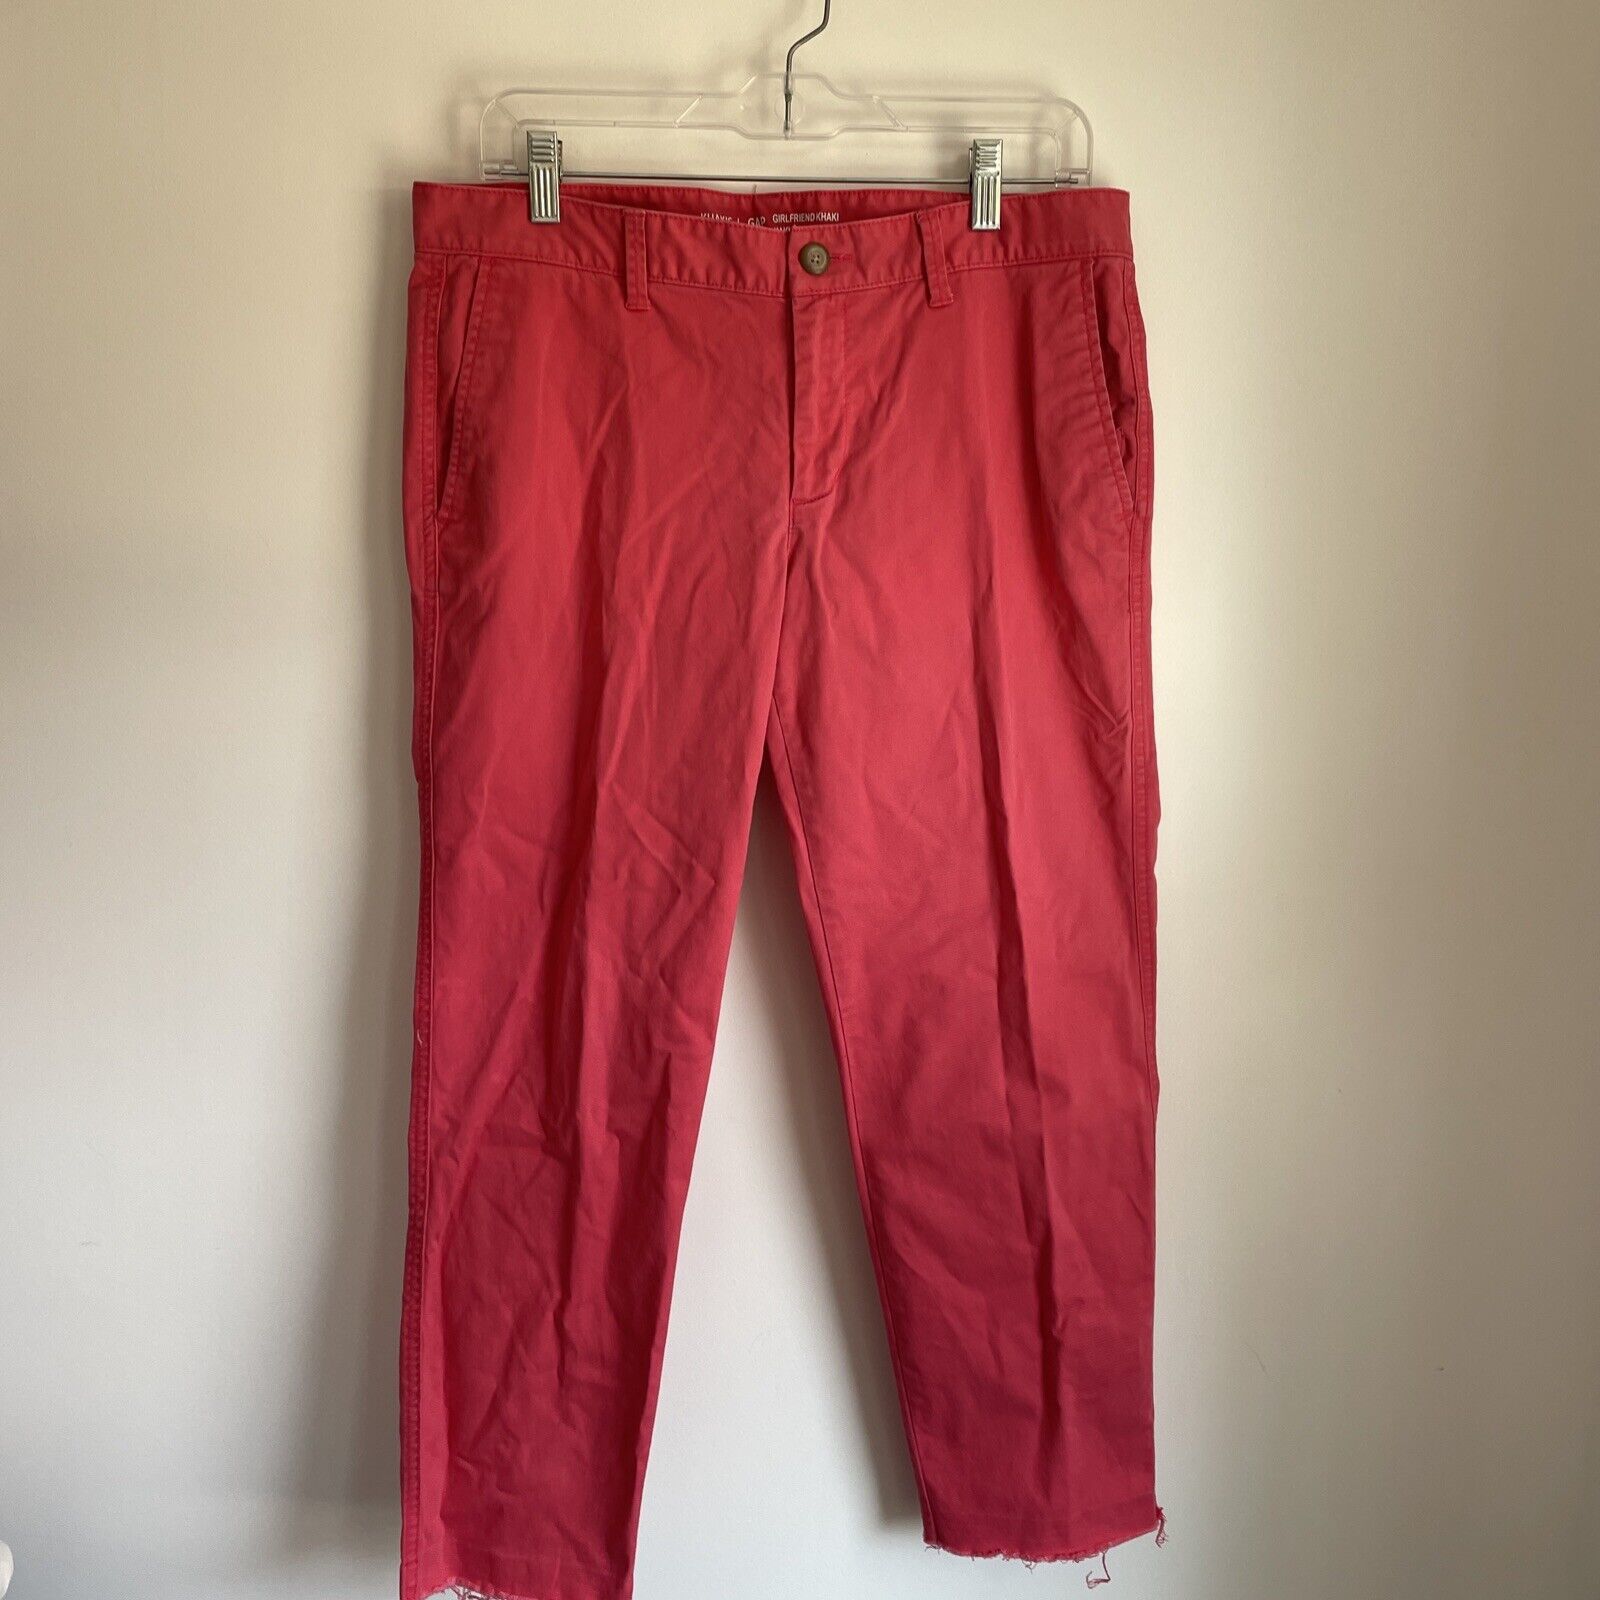 Primary image for Gap Girlfriend Khaki Womens 6 Pink Stretch Capri Cropped Pants